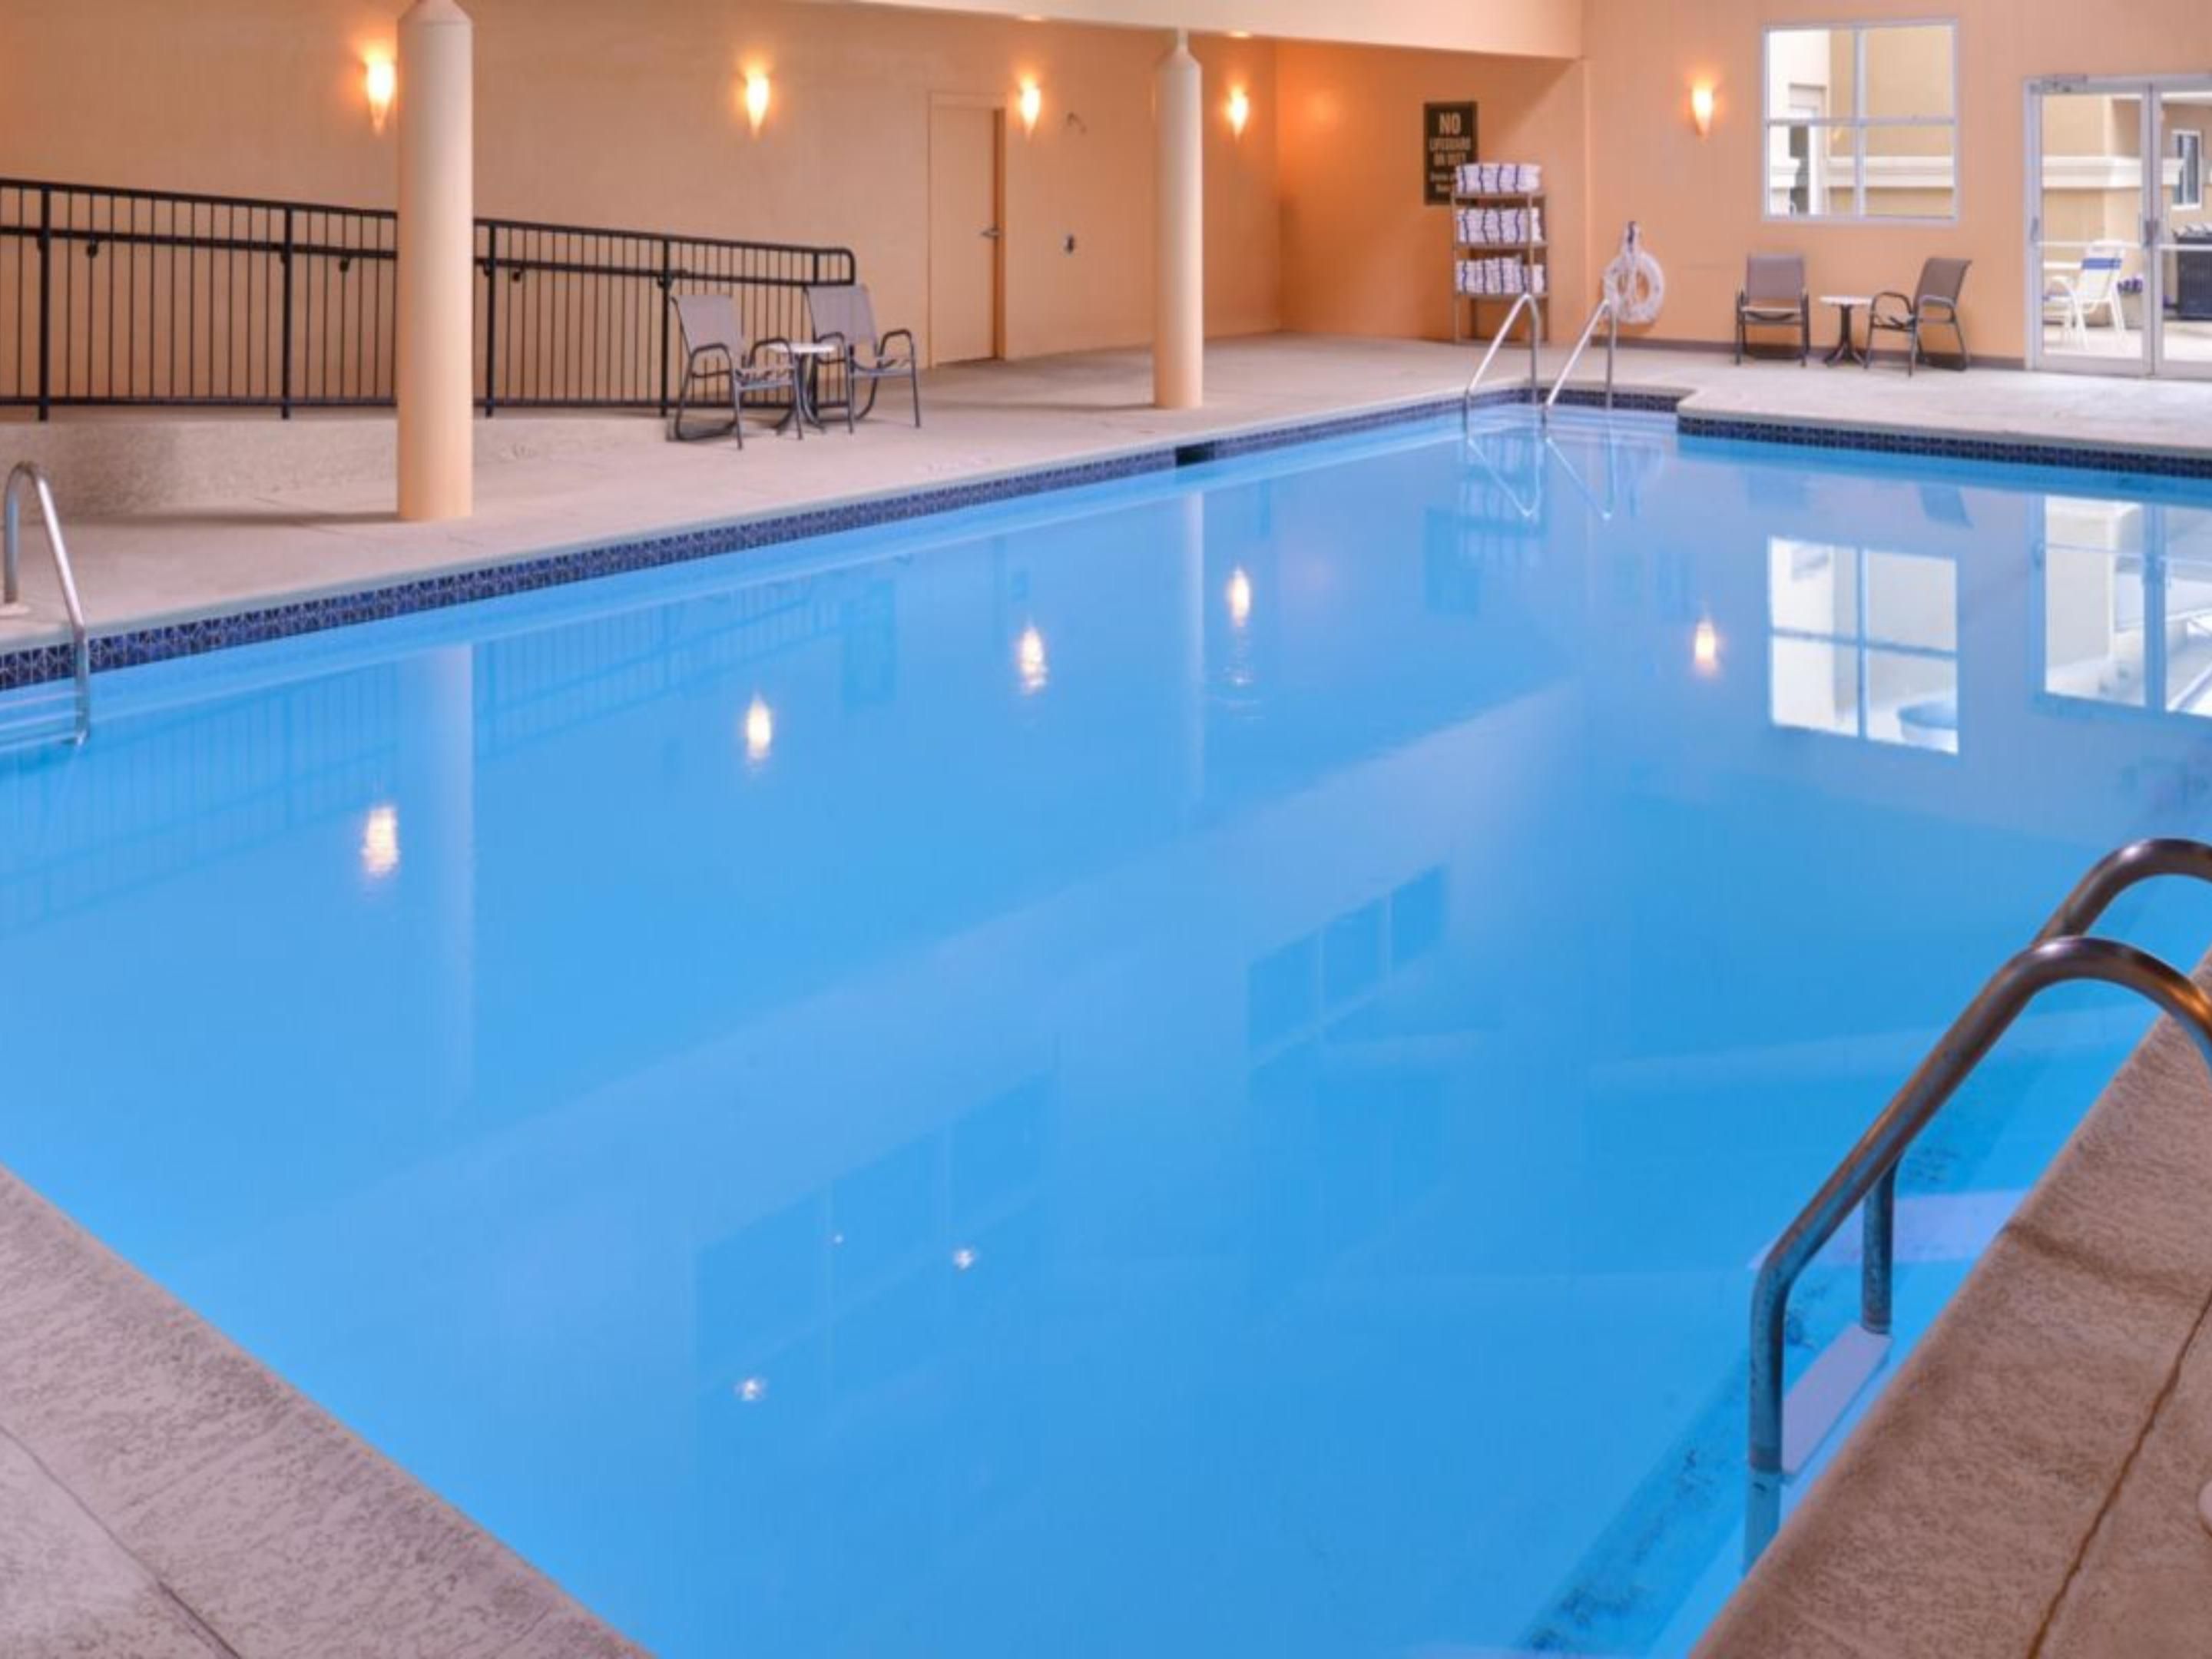 The Holiday Inn Martinsburg's heated indoor pool is a great place to get away and unwind for the weekend!!